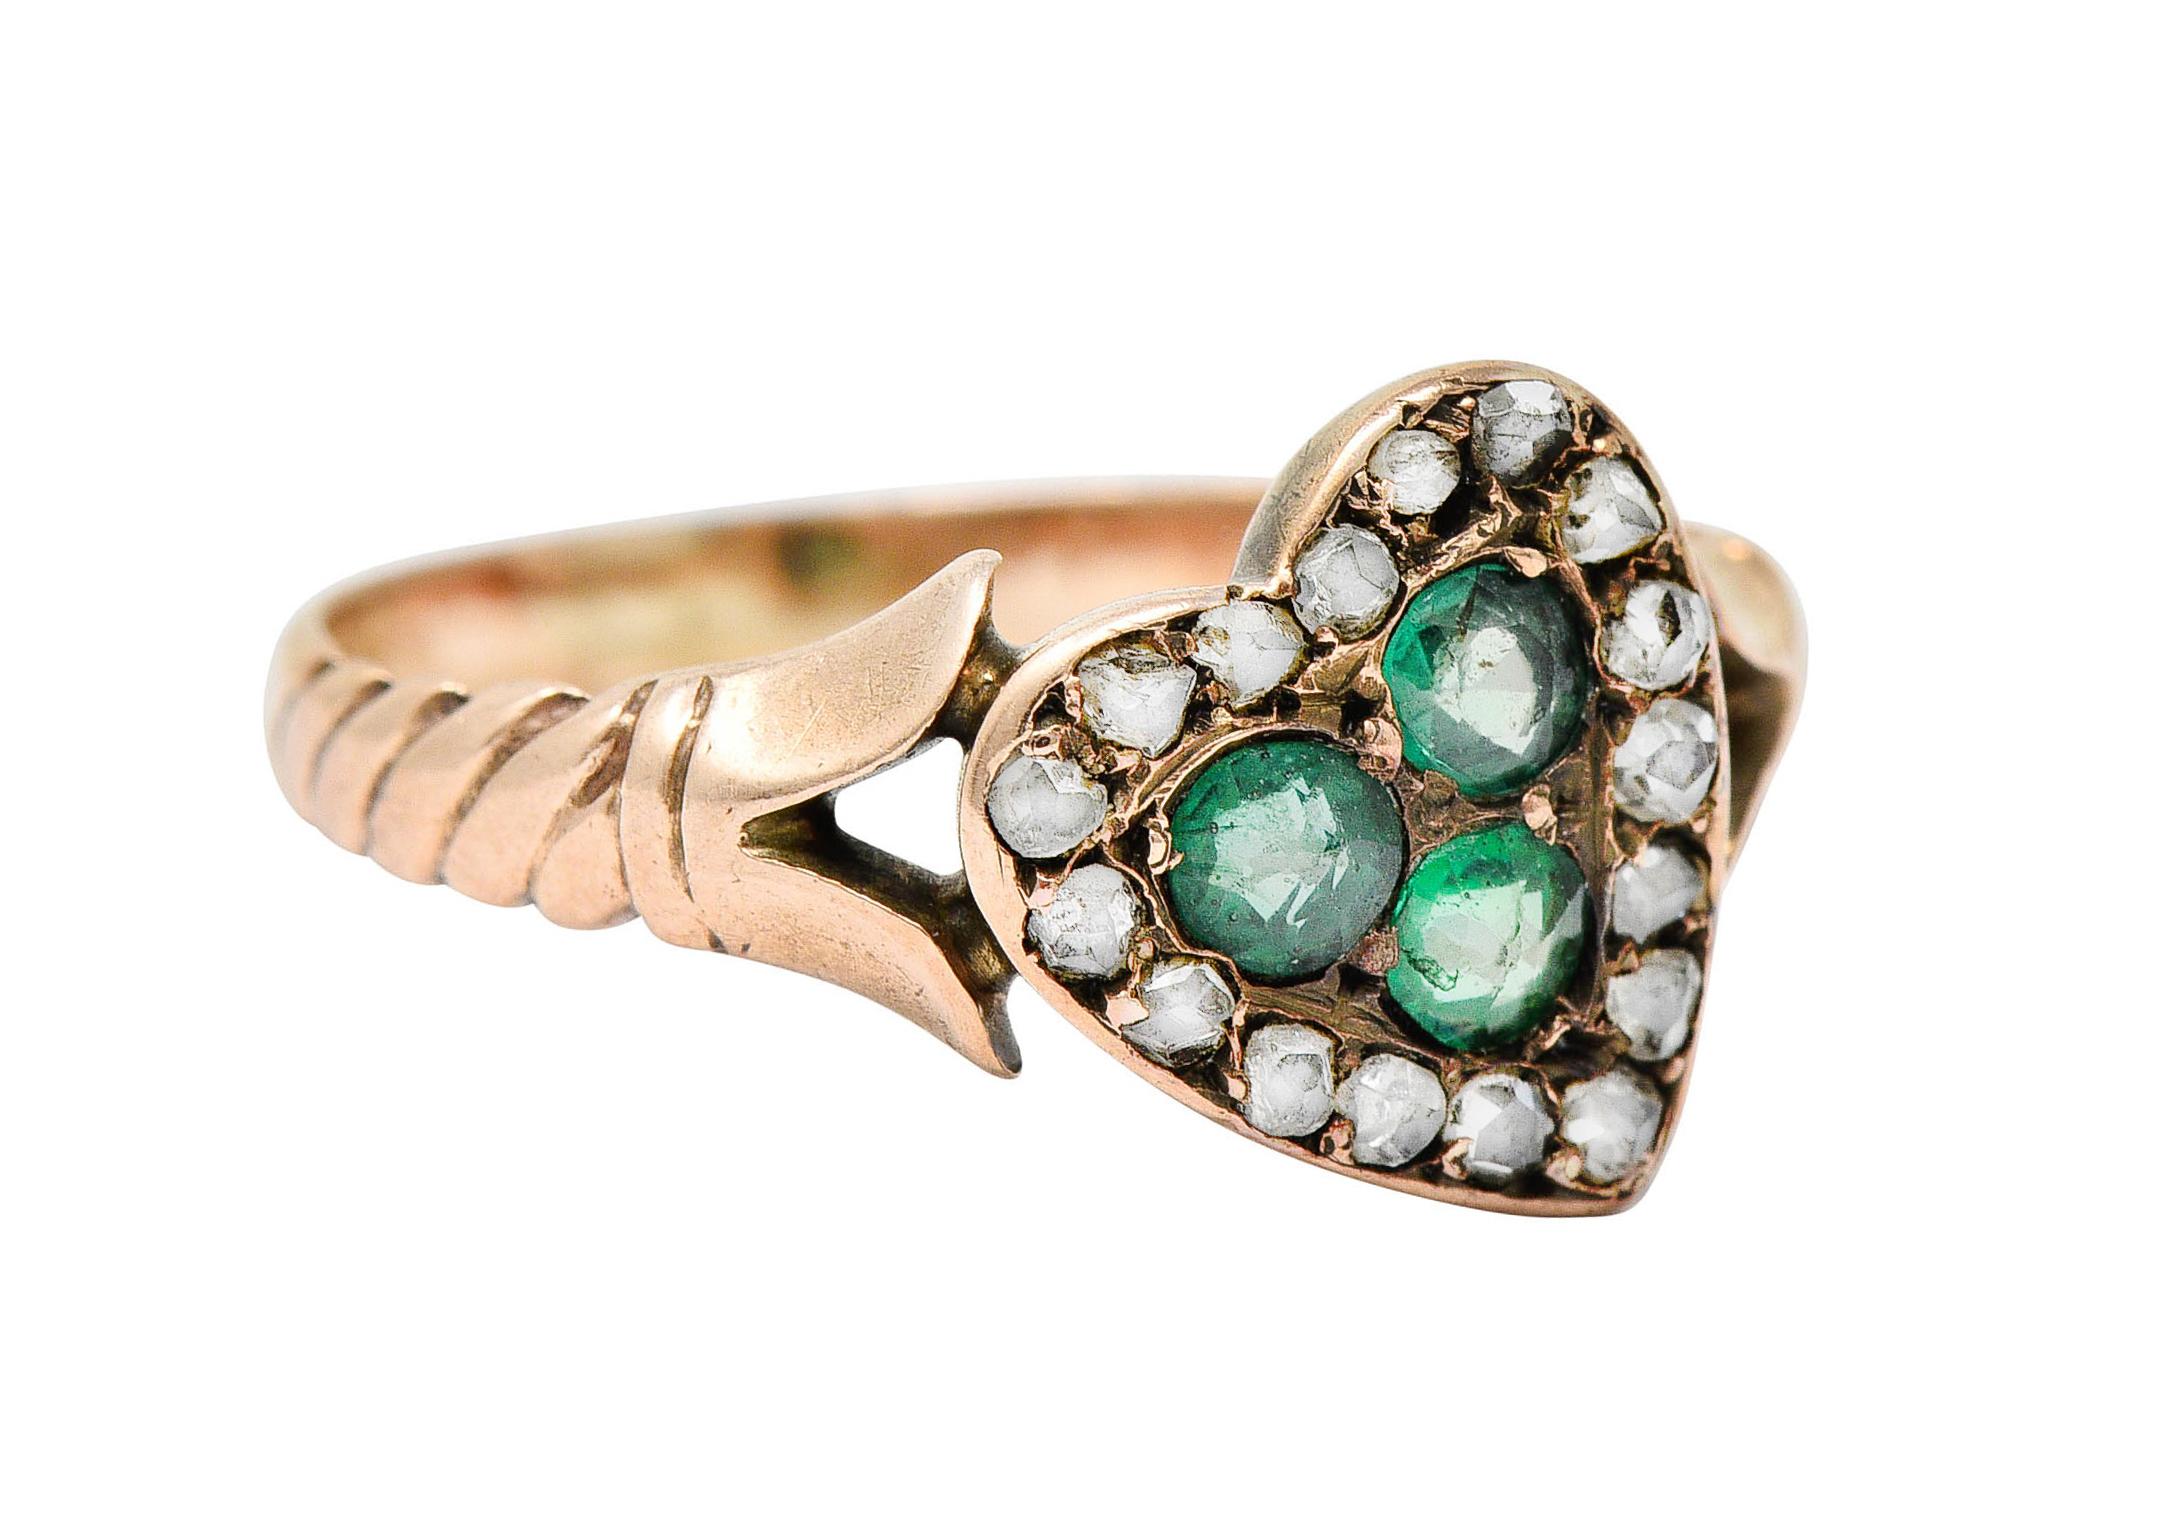 Band ring features a heart motif that centers three round cut green paste gemstones - well matched

With a rose cut diamond halo - color and quality consistent with age

Completed by stylized tulip shoulders and ribbed texture

Tested as 14 karat